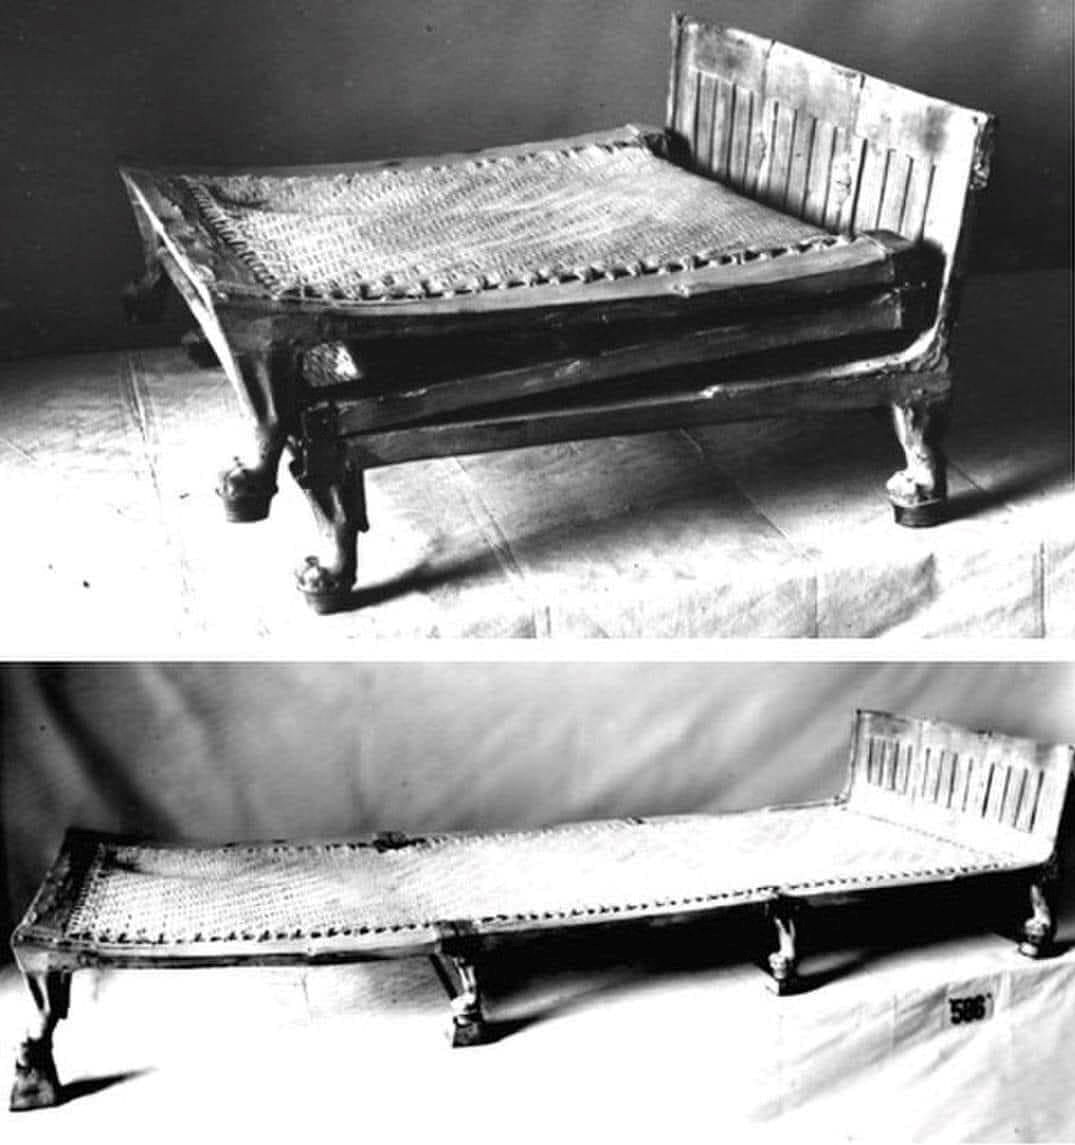 A Three-Fold Bed Found In Tutankhamun's Tomb In The Valley Of The Kings, Luxor, Egypt. It's Believed To Be The First Of Its Kind, And Highly Sophisticated For Its Time. The Bed Folded Up Into A Z-Shape, Making It Compact And Easy To Transport